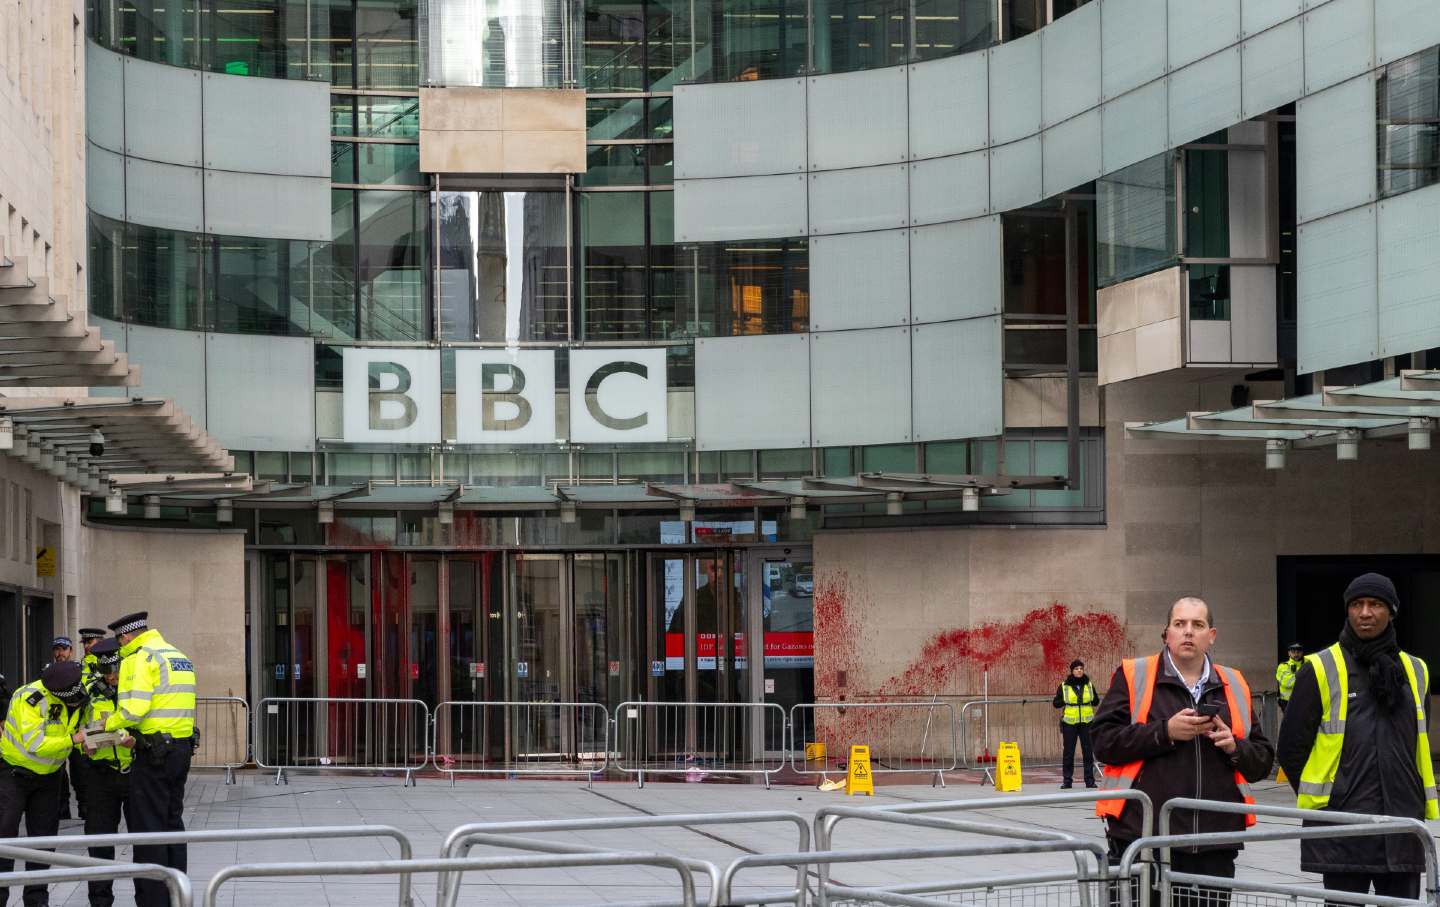 Security guards stand outside the BBC’s London headquarters, which pro-Palestine activists splashed with red paint in protest of the BBC's biased coverage of Israel’s attacks on Gaza.